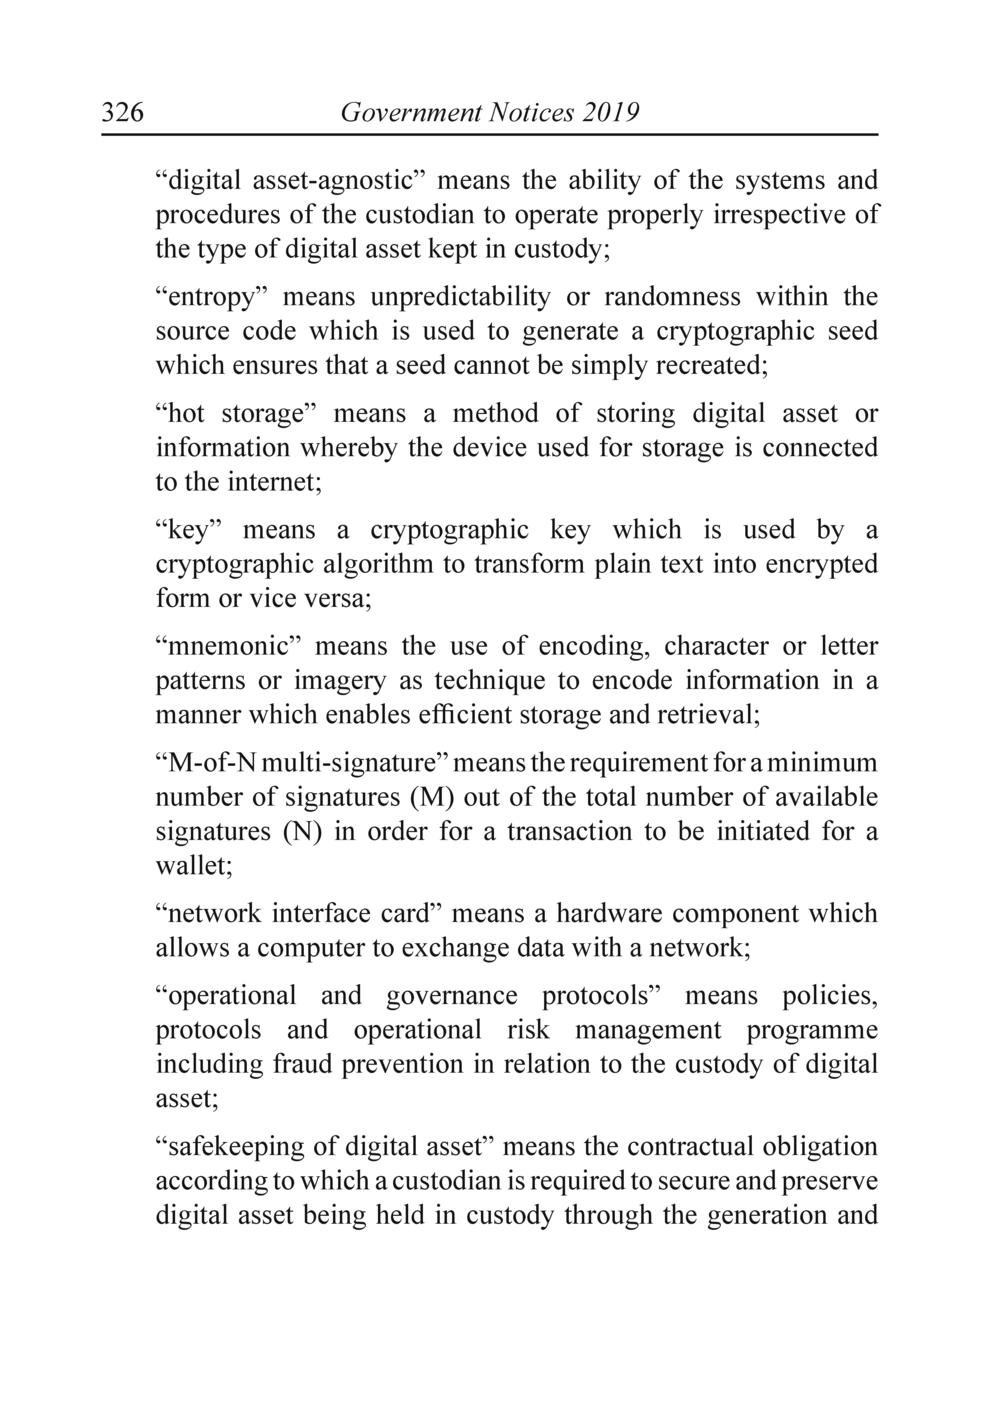 The Financial Services Custodian services digital asset Rules 2019